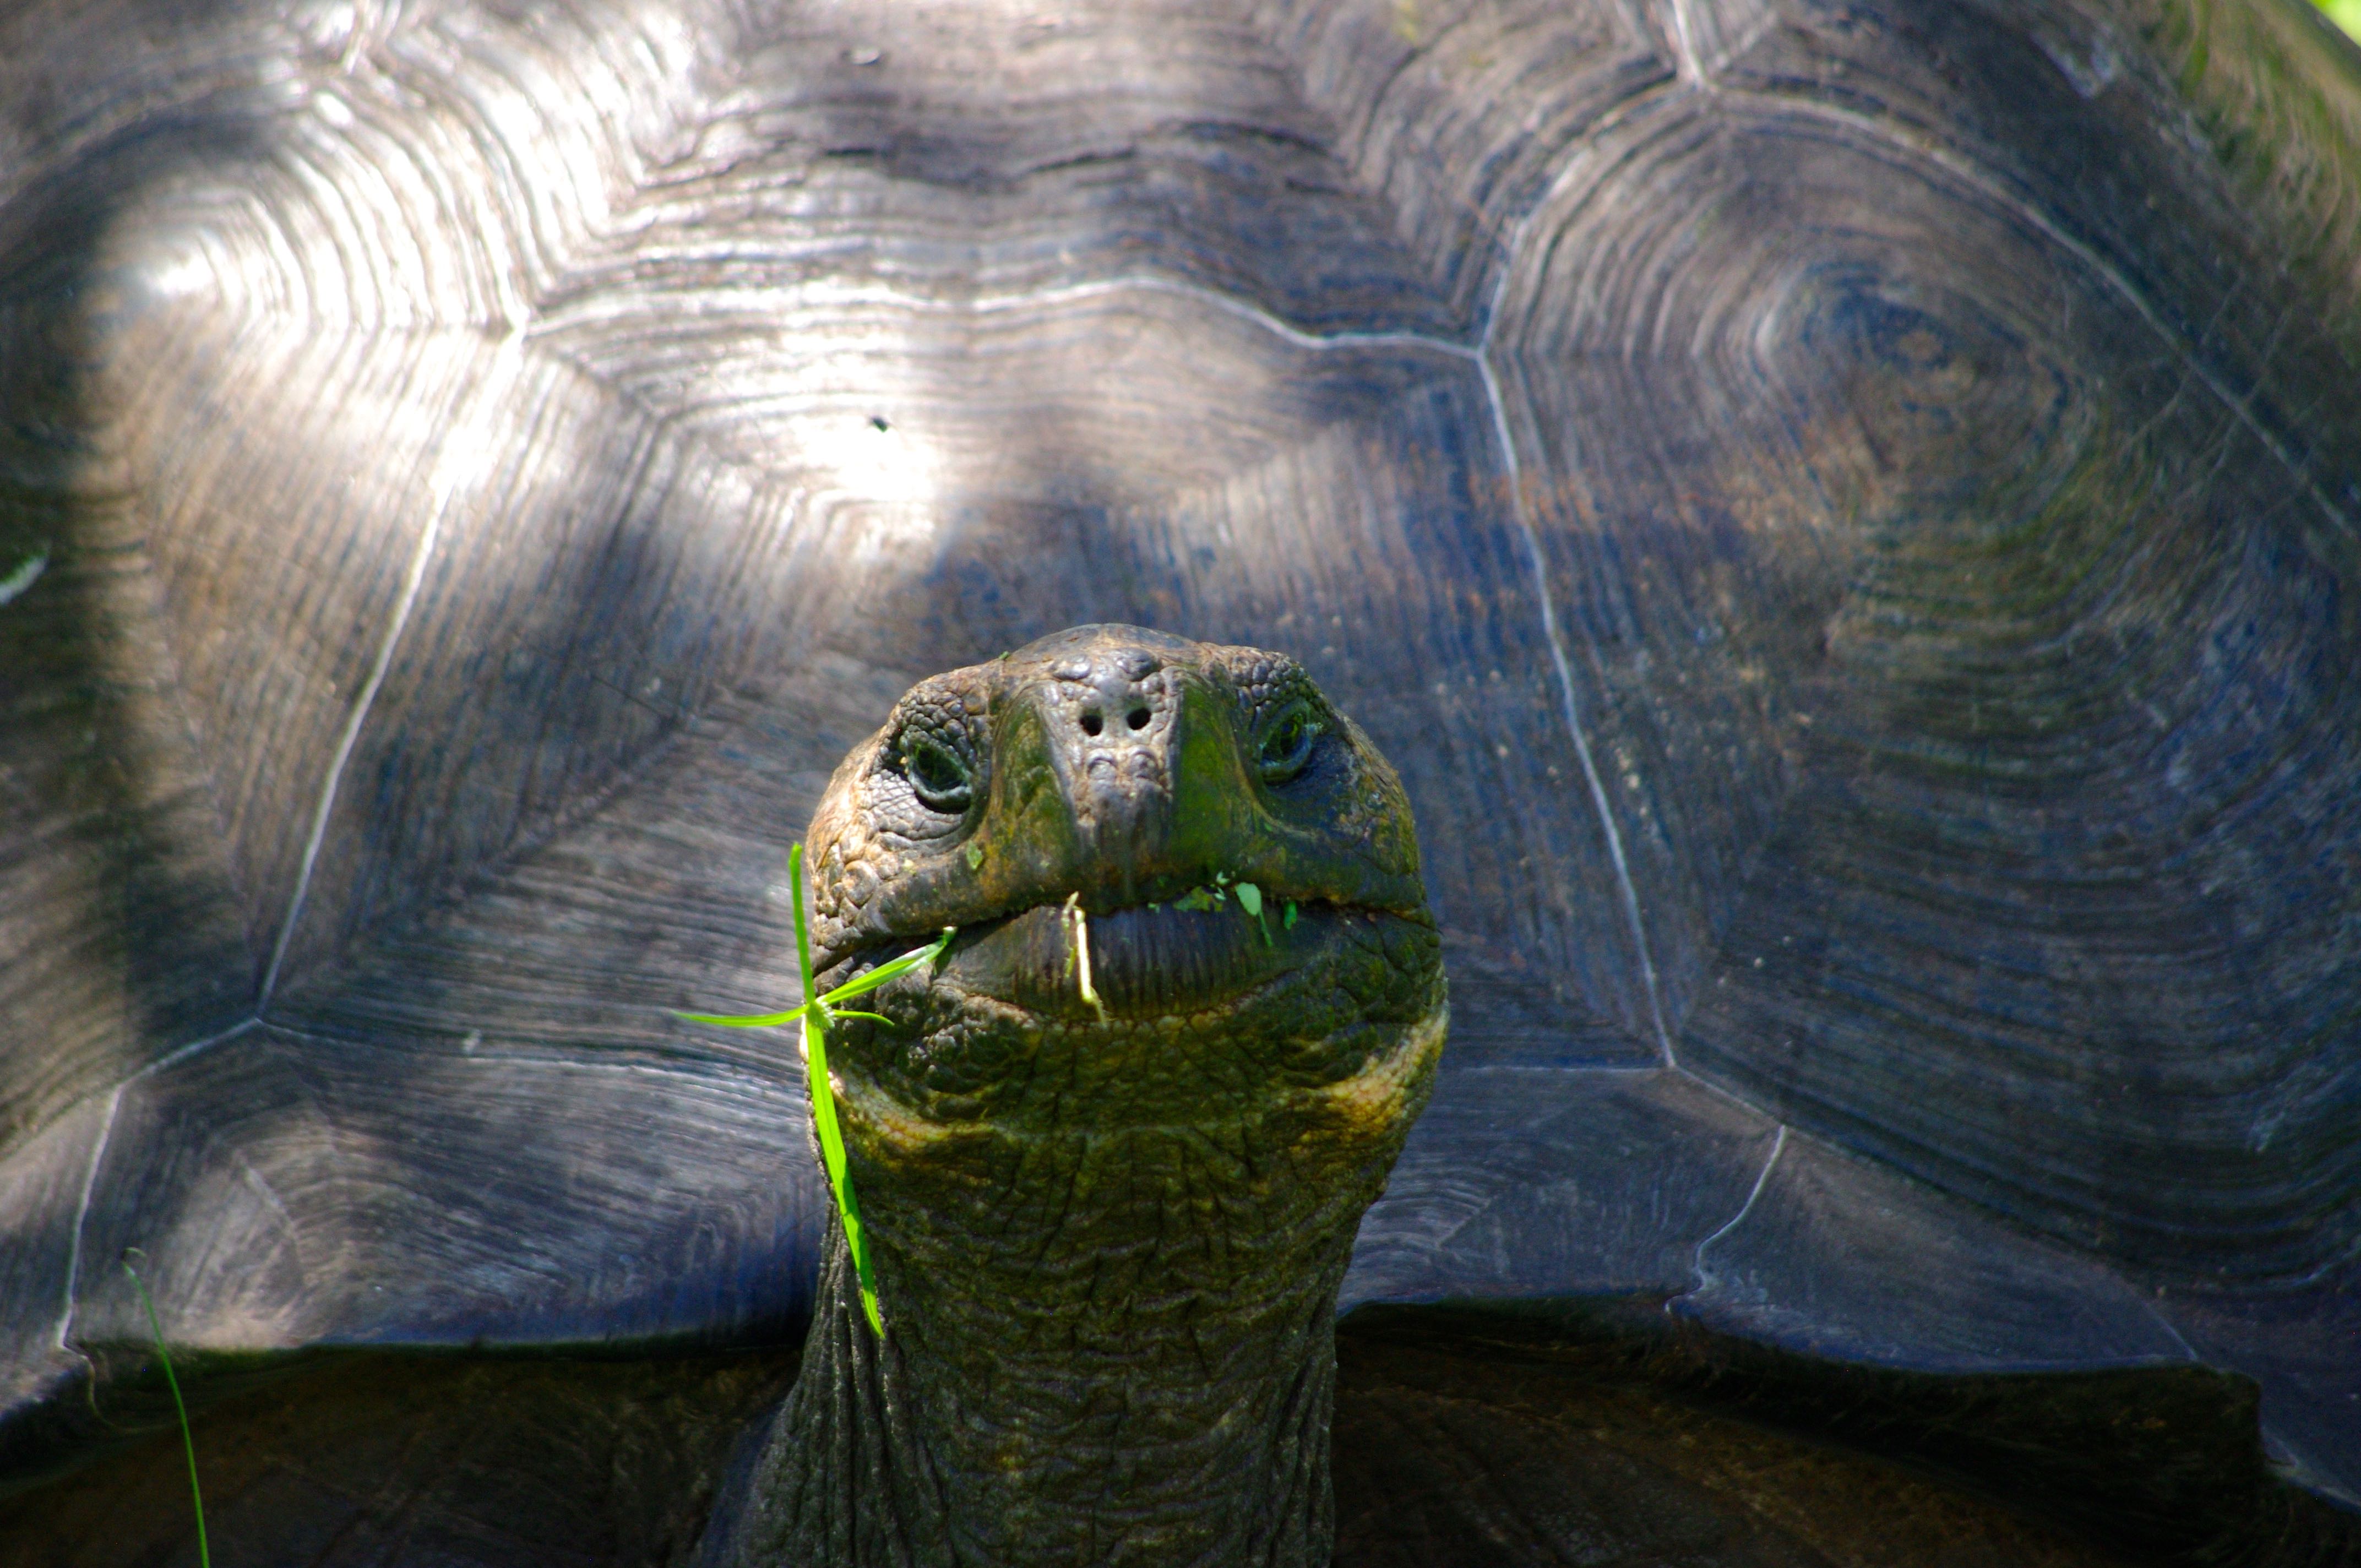 Turtle in the Galapagos Islands